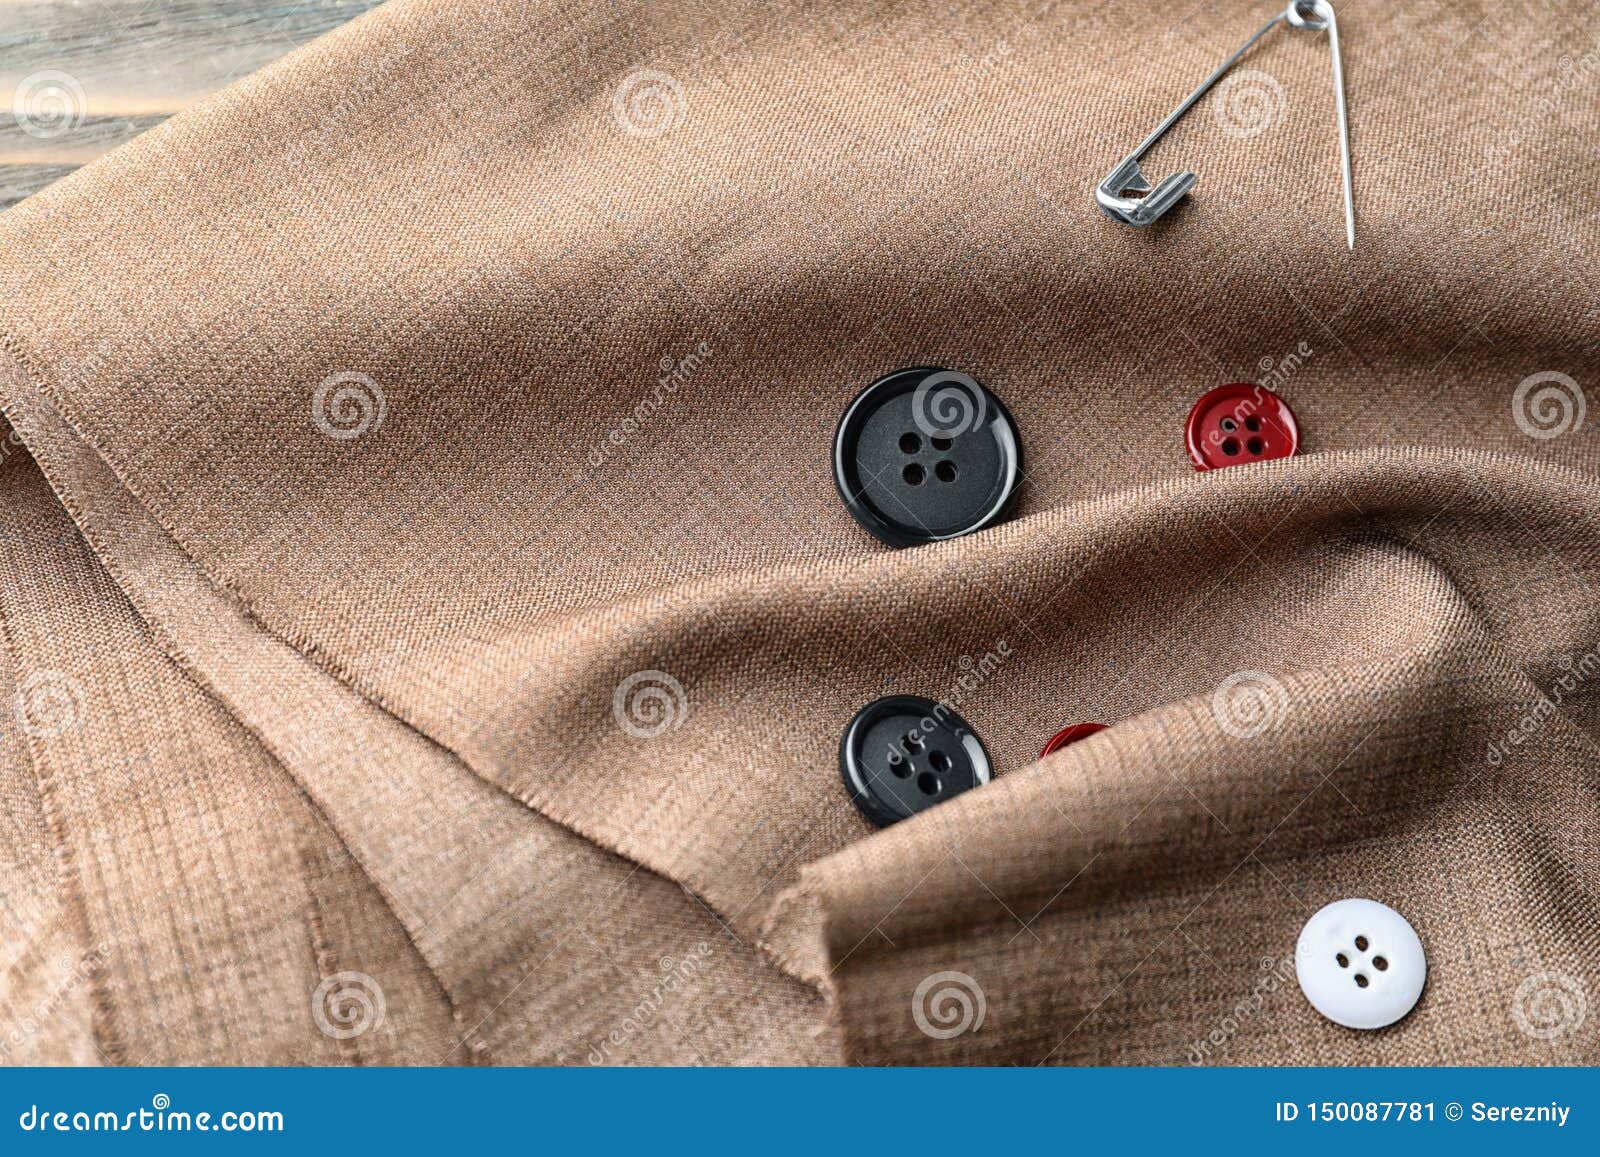 Safety Pin and Buttons on Fabric Stock Image - Image of object, garment ...